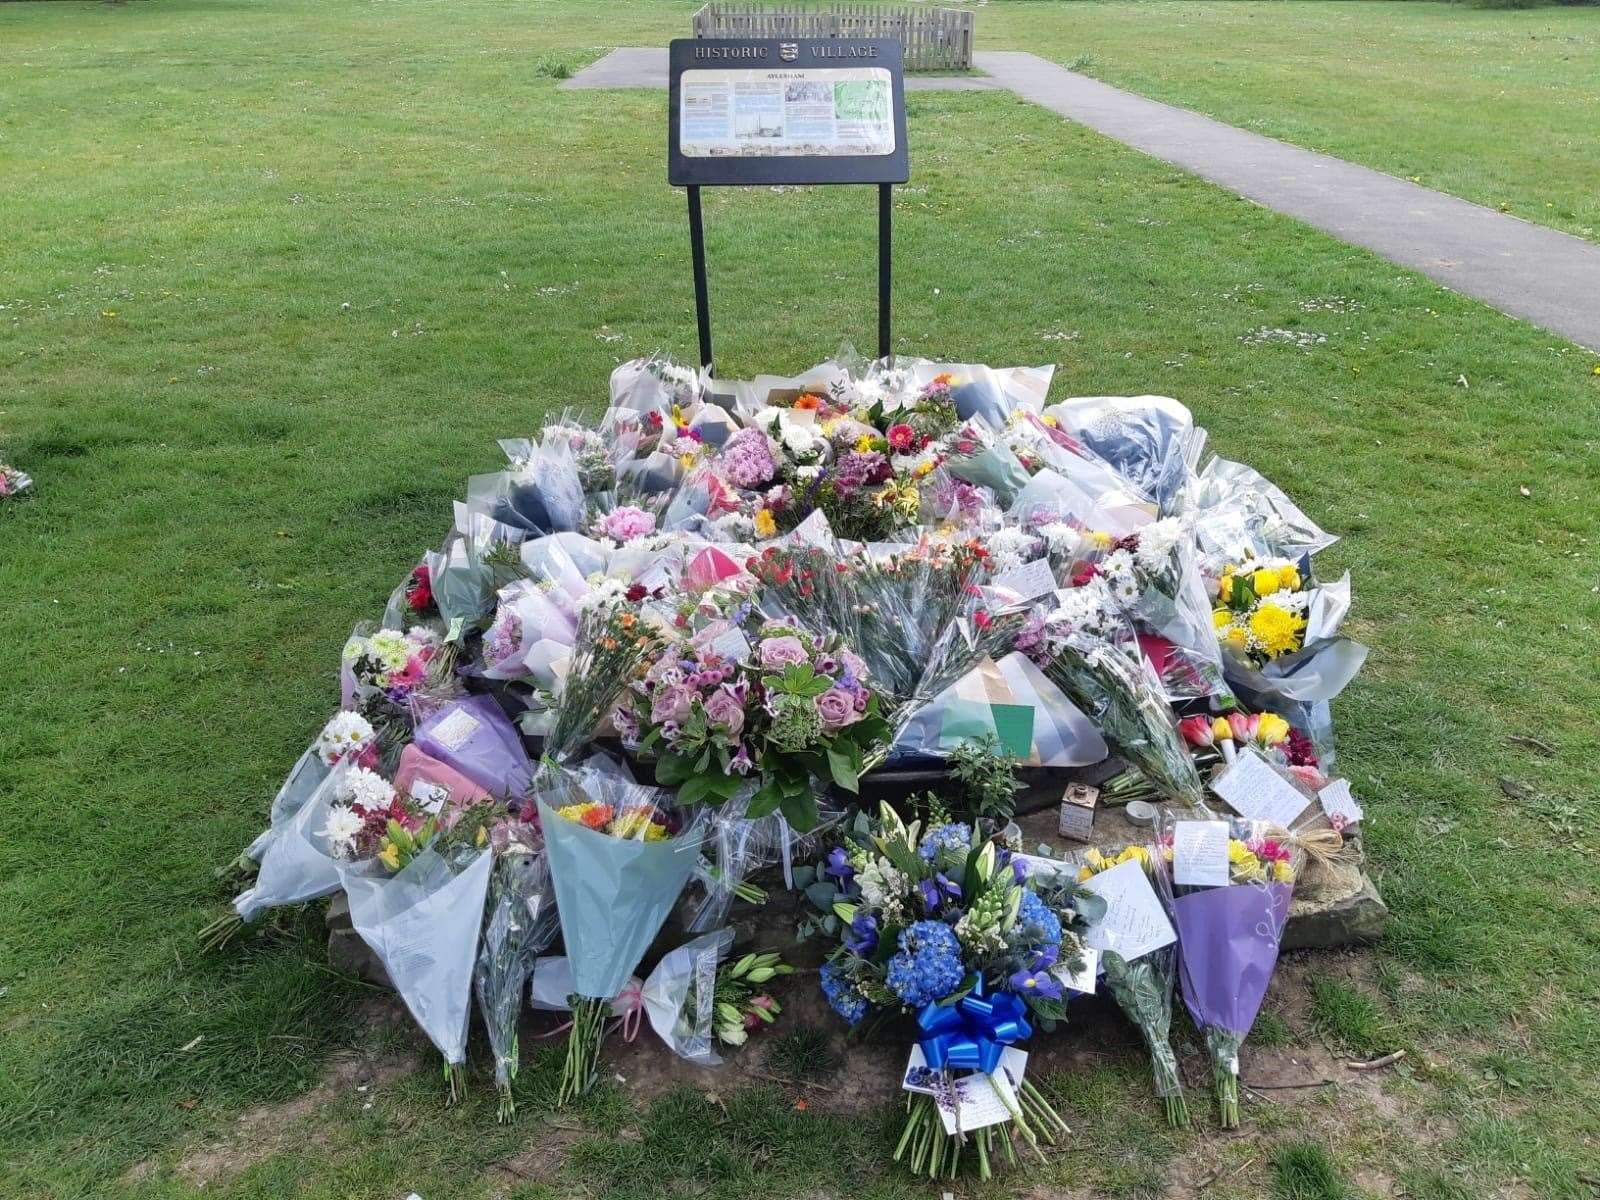 Floral tributes built up in a memorial site in the centre Aylesham for Julia James. This scene was photographed three days after the murder